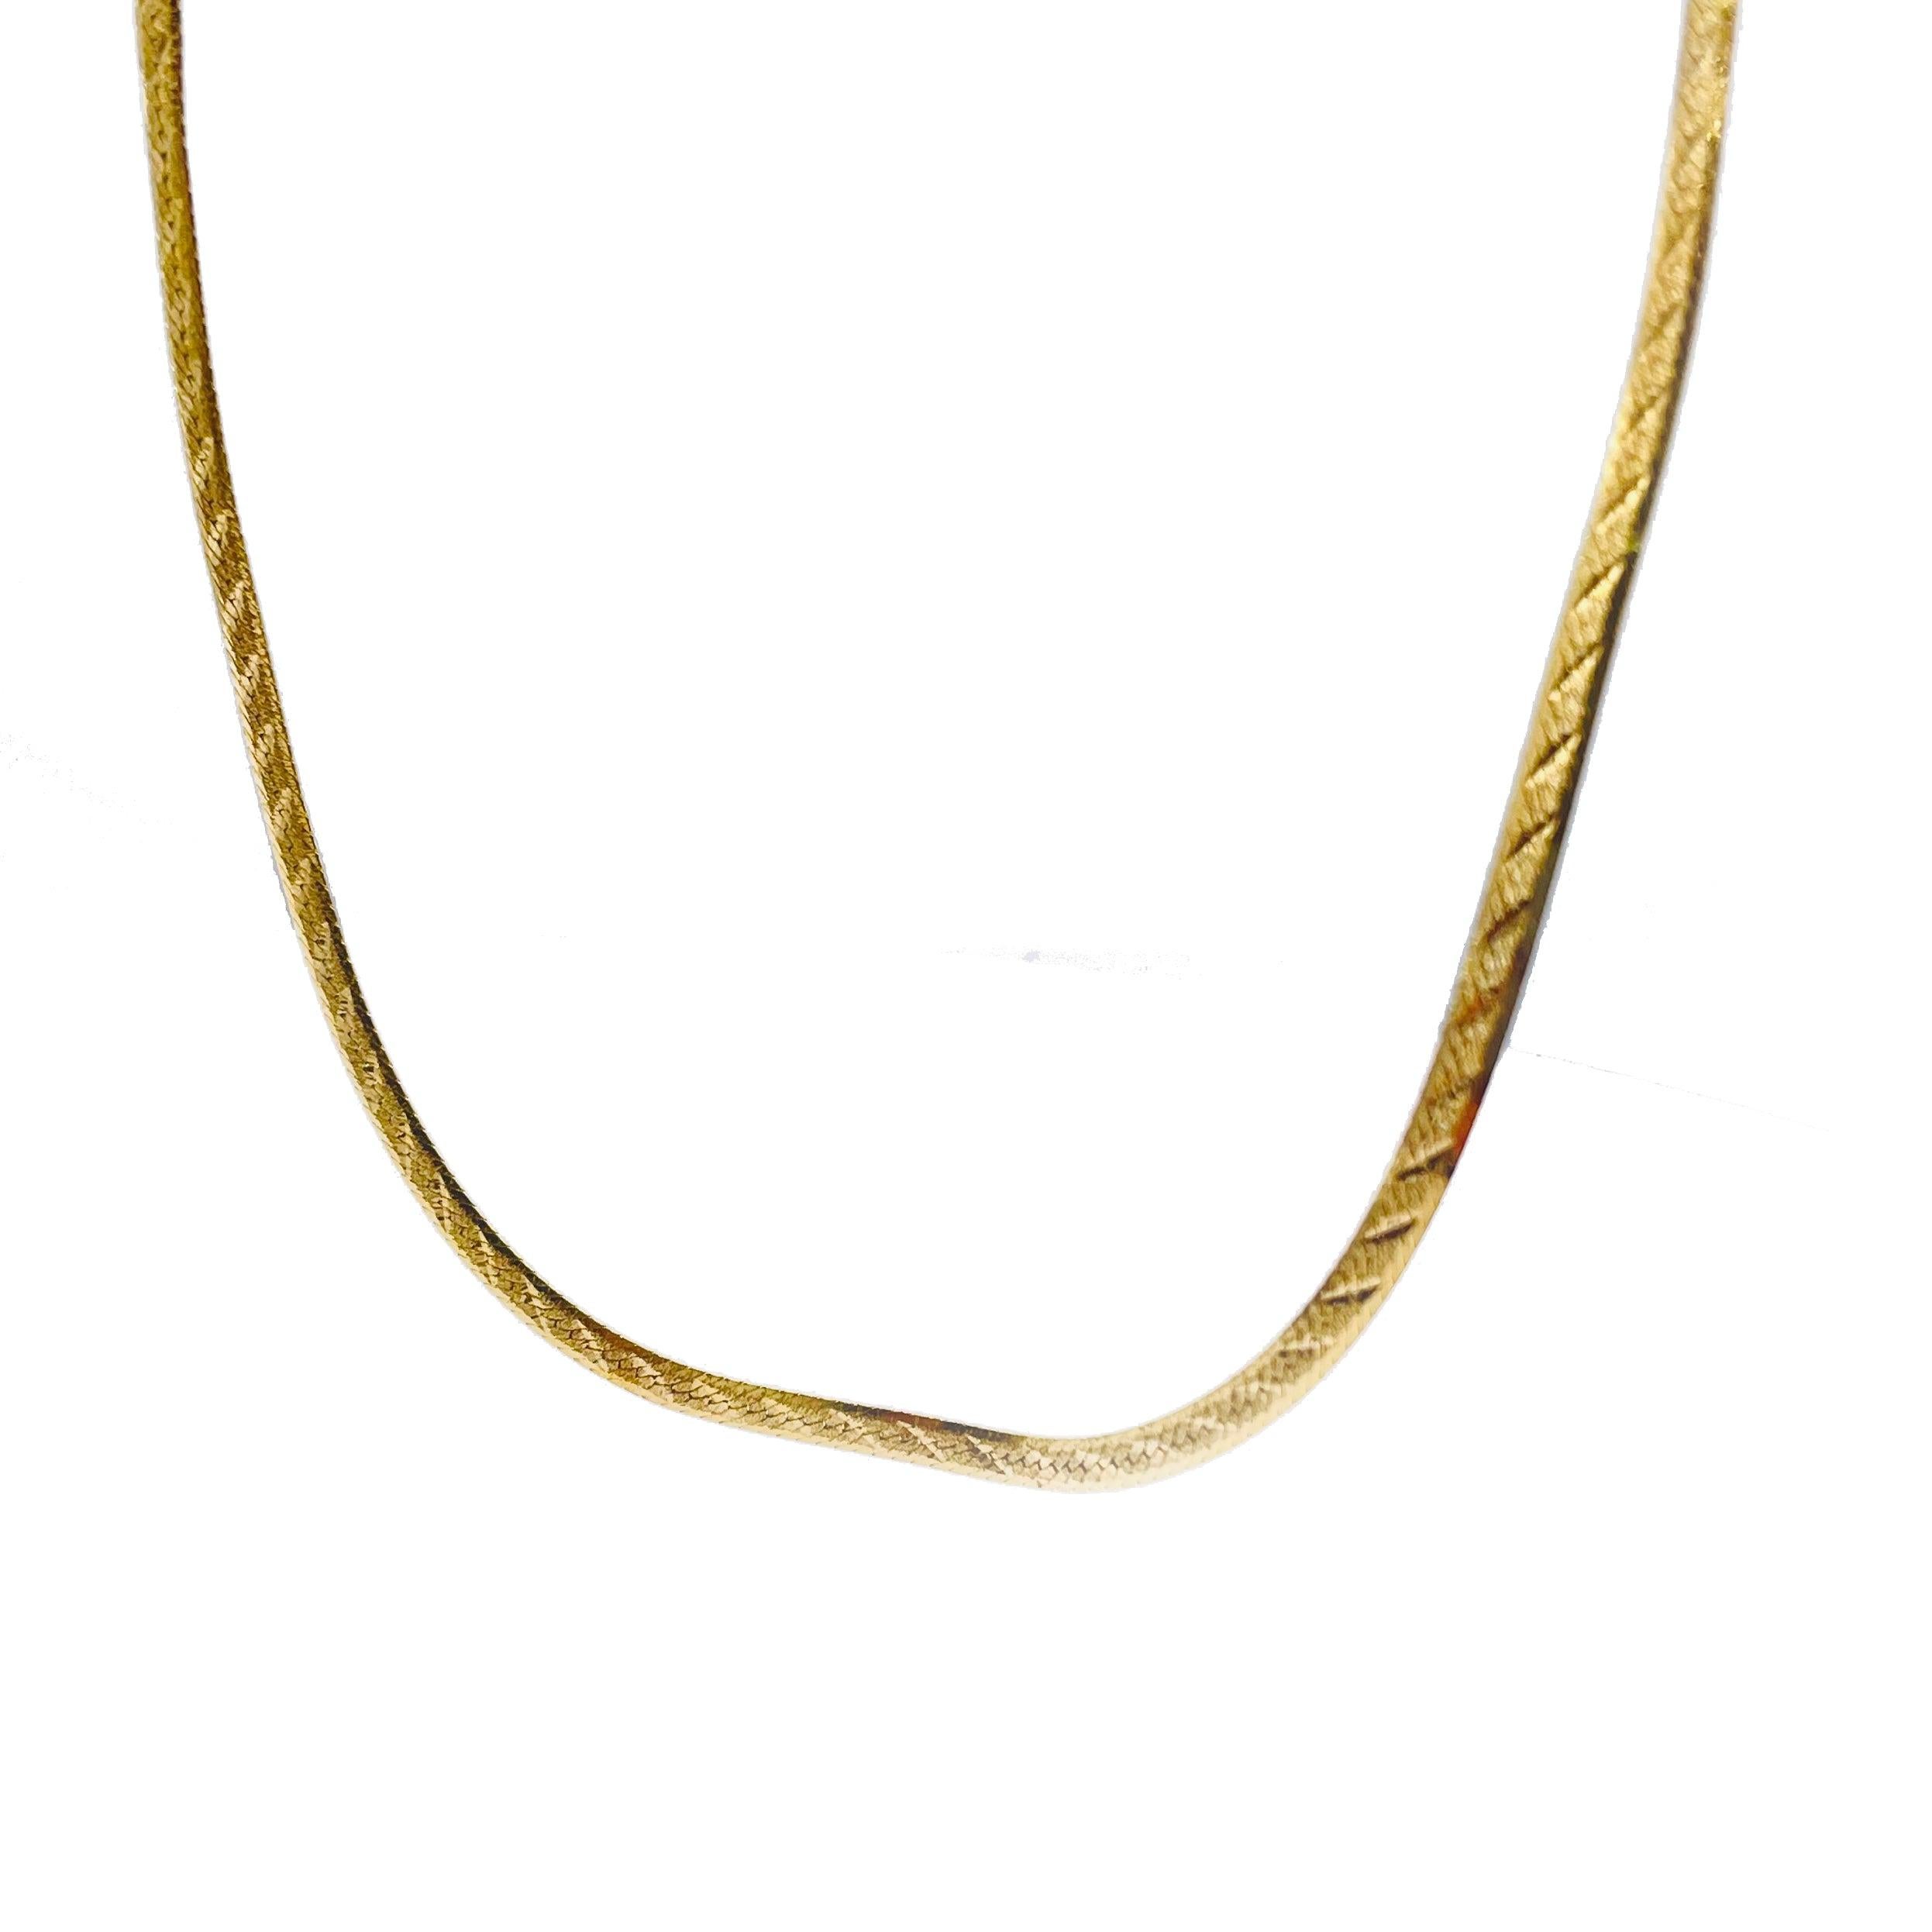 Timeless Elegance 14K Yellow Gold Chain Bracelet

Be timelessly stylish with this 14K Yellow Gold Fishtail Chain. This exquisite chain features a classic fishtail design weighing of 4.48 gram & 14K yellow gold.

Size 19.5